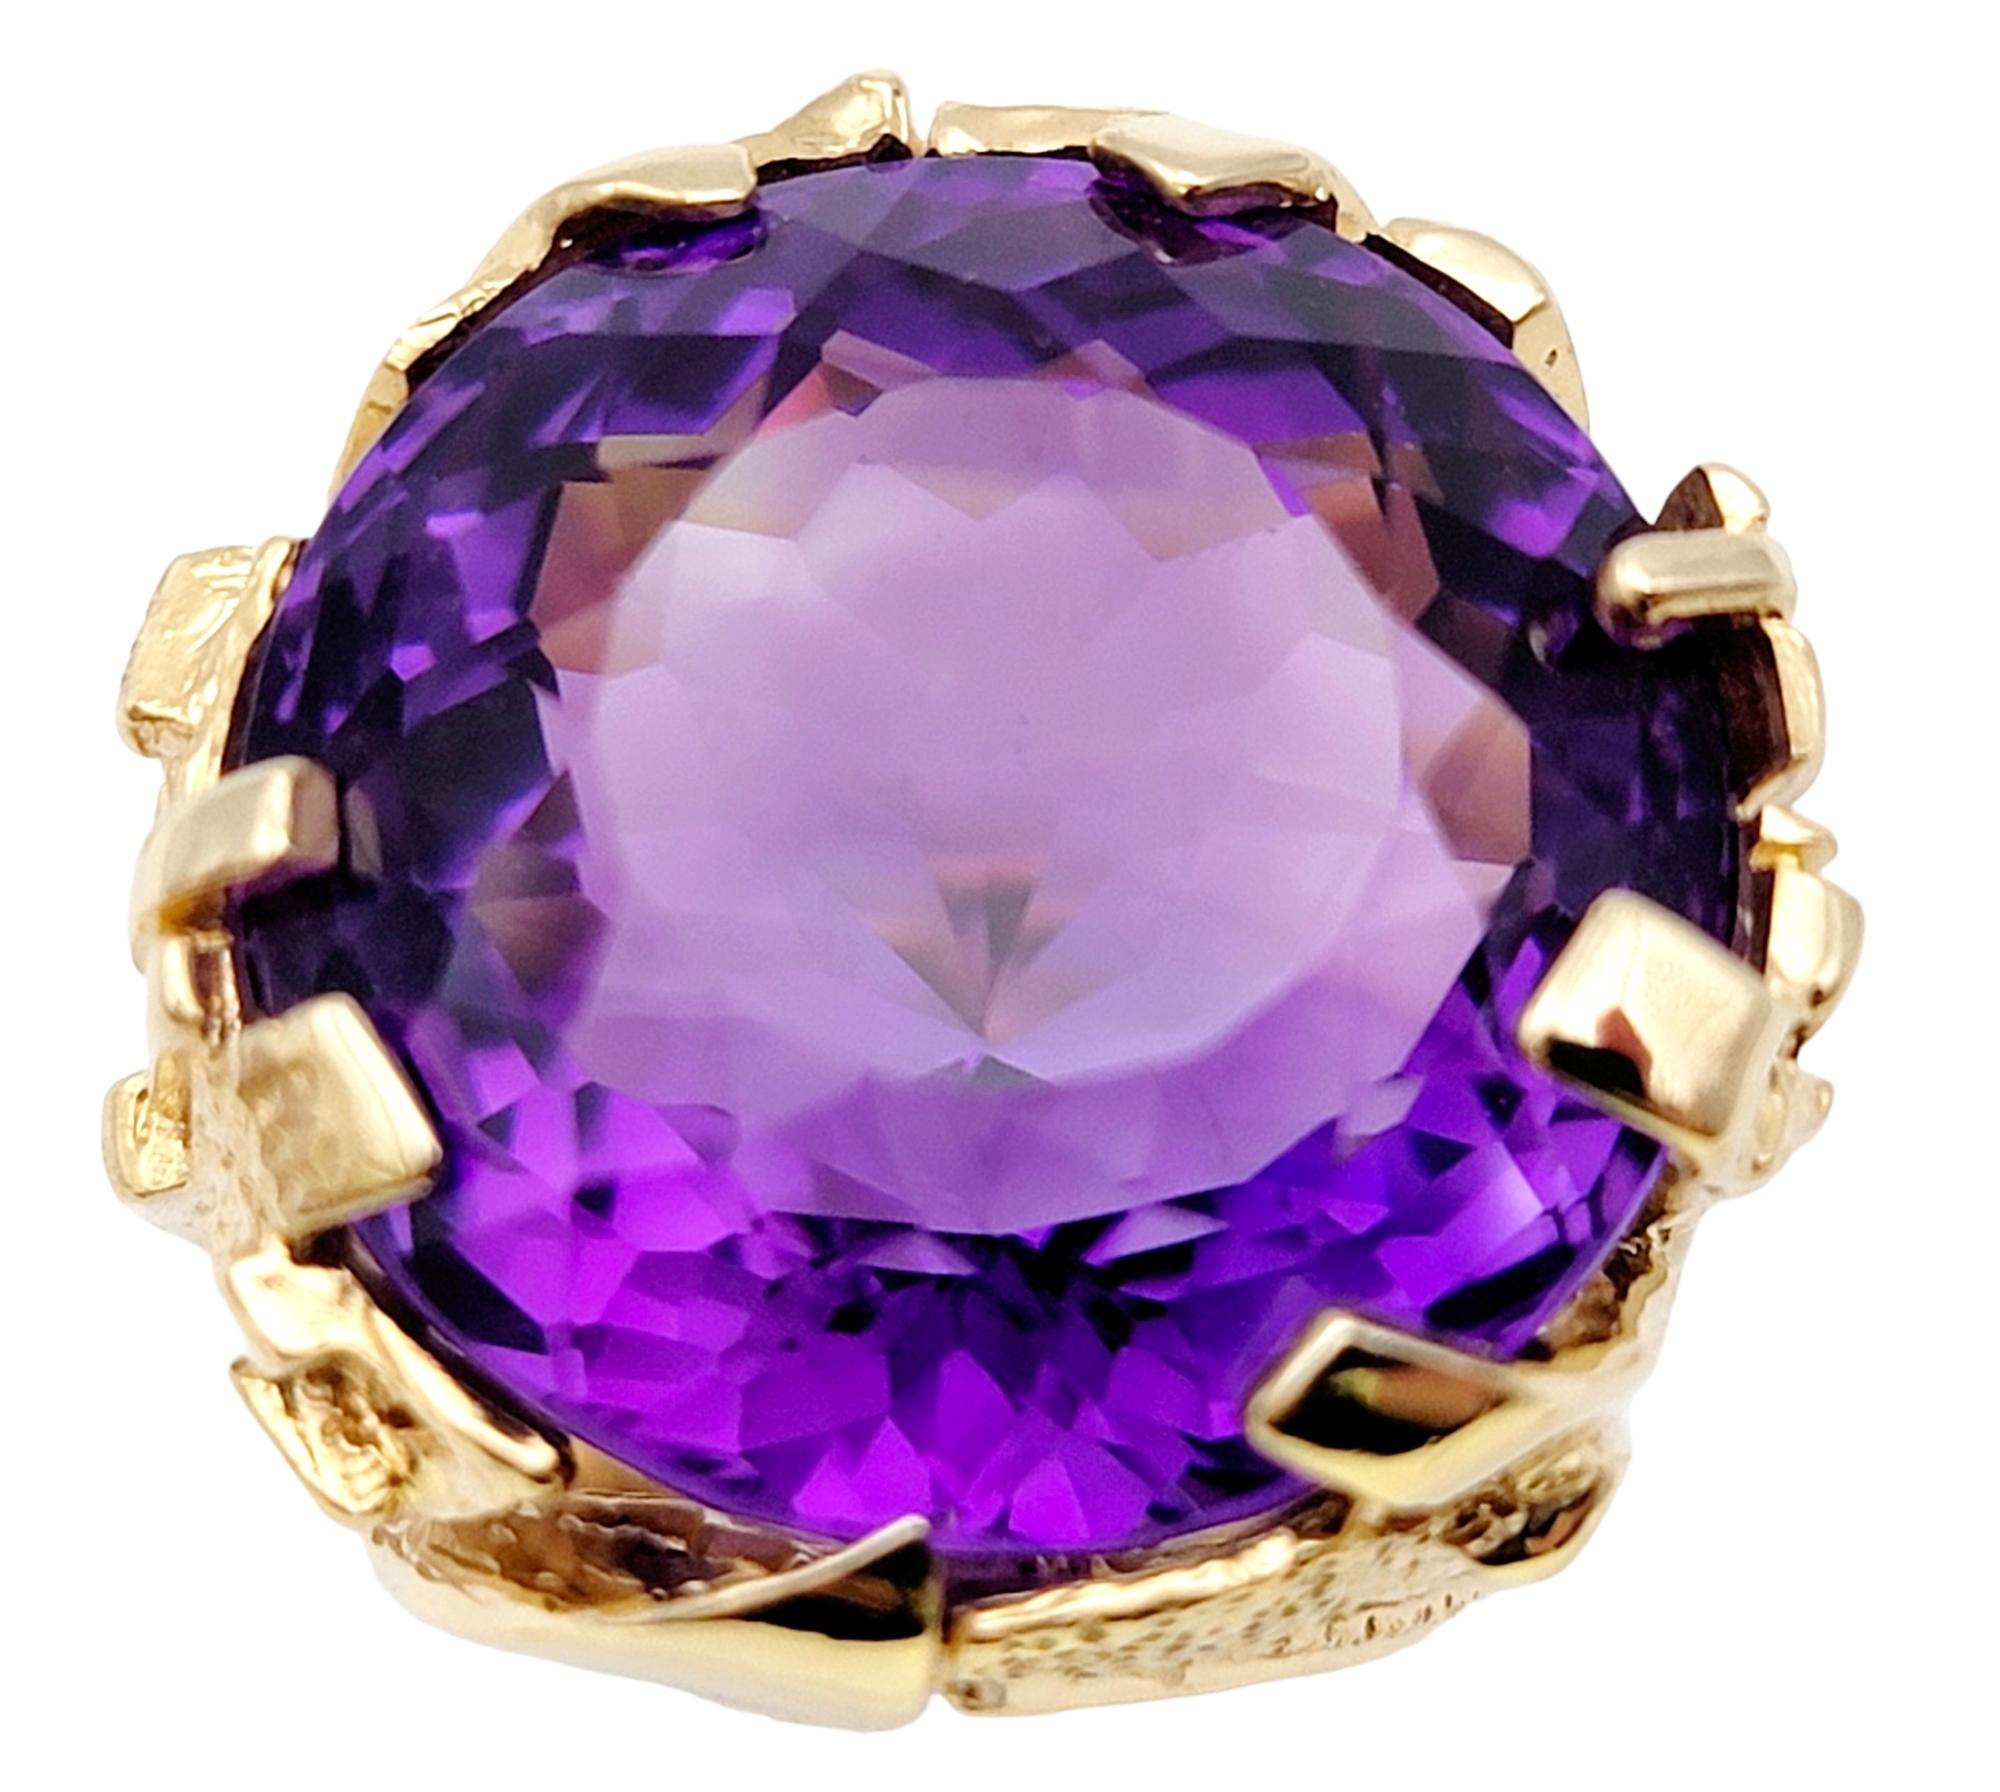 Ring size: 9

This ring is a truly spectacular statement piece filled with magnificent color, intricate detailing and a bold design. The huge round amethyst stone is multiple prong set in luxurious yellow gold with elaborate detail work along the